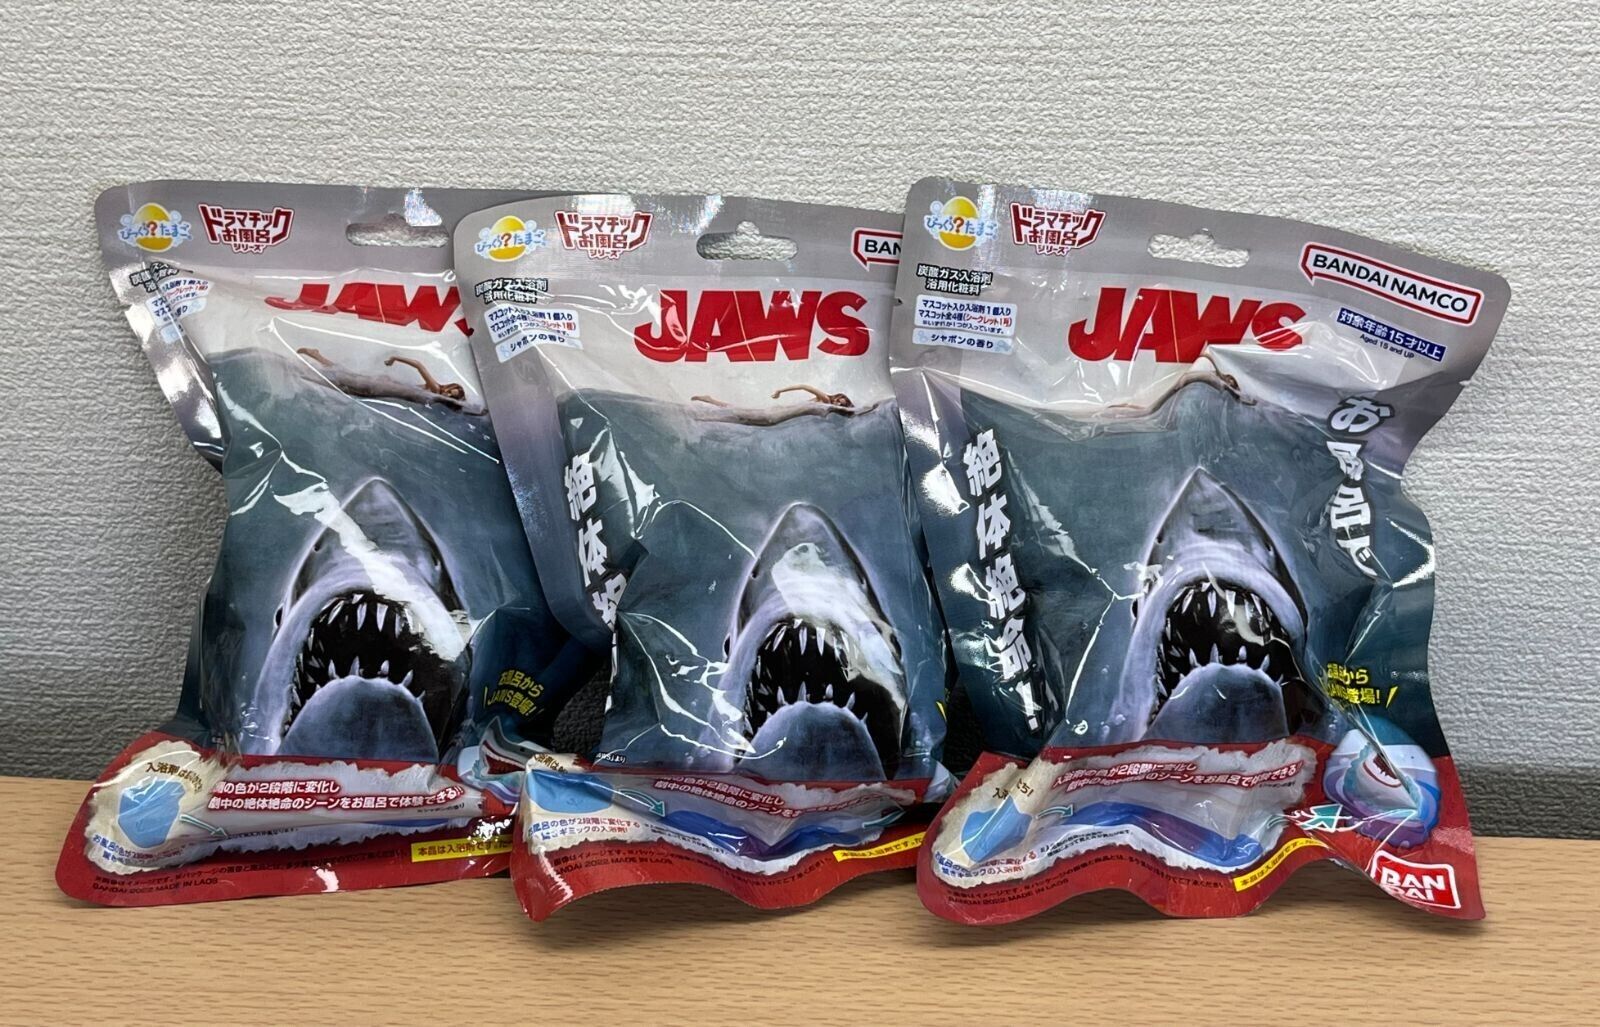 JAWS Orca Bath Bomb Egg with Figure Shape BANDAI NAMCO Set of 3 From Japan New